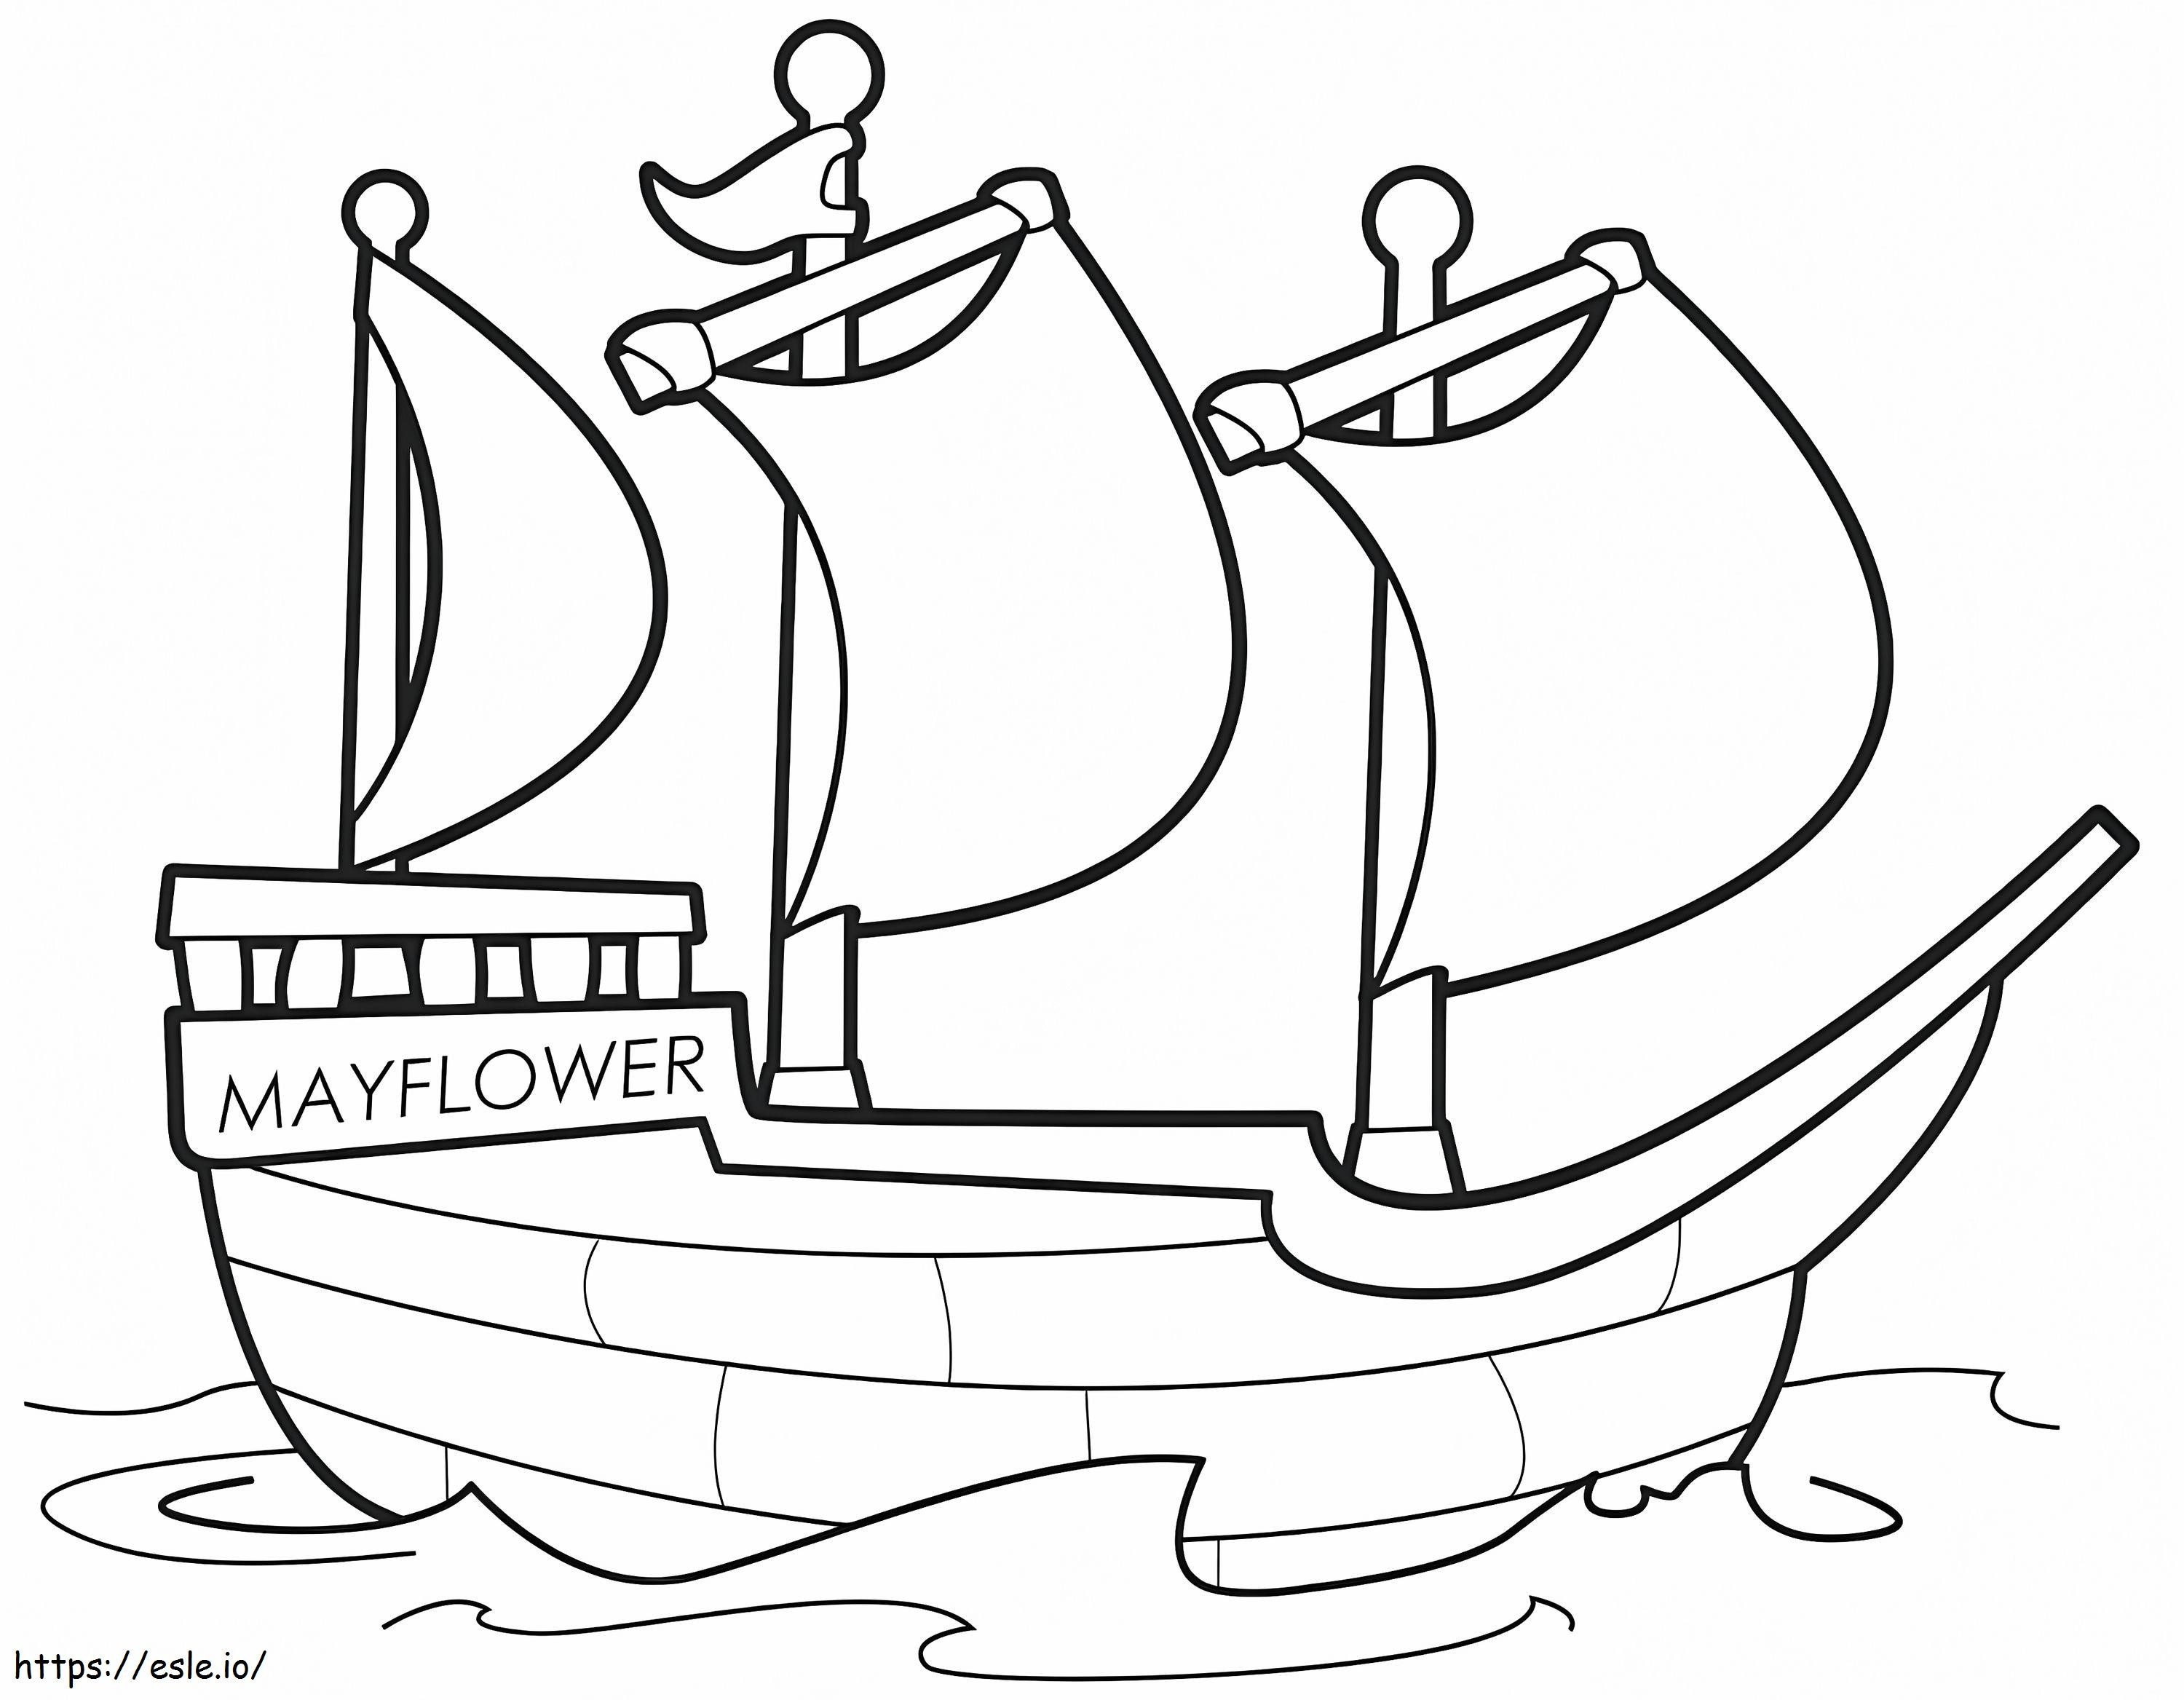 Mayflower 6 coloring page